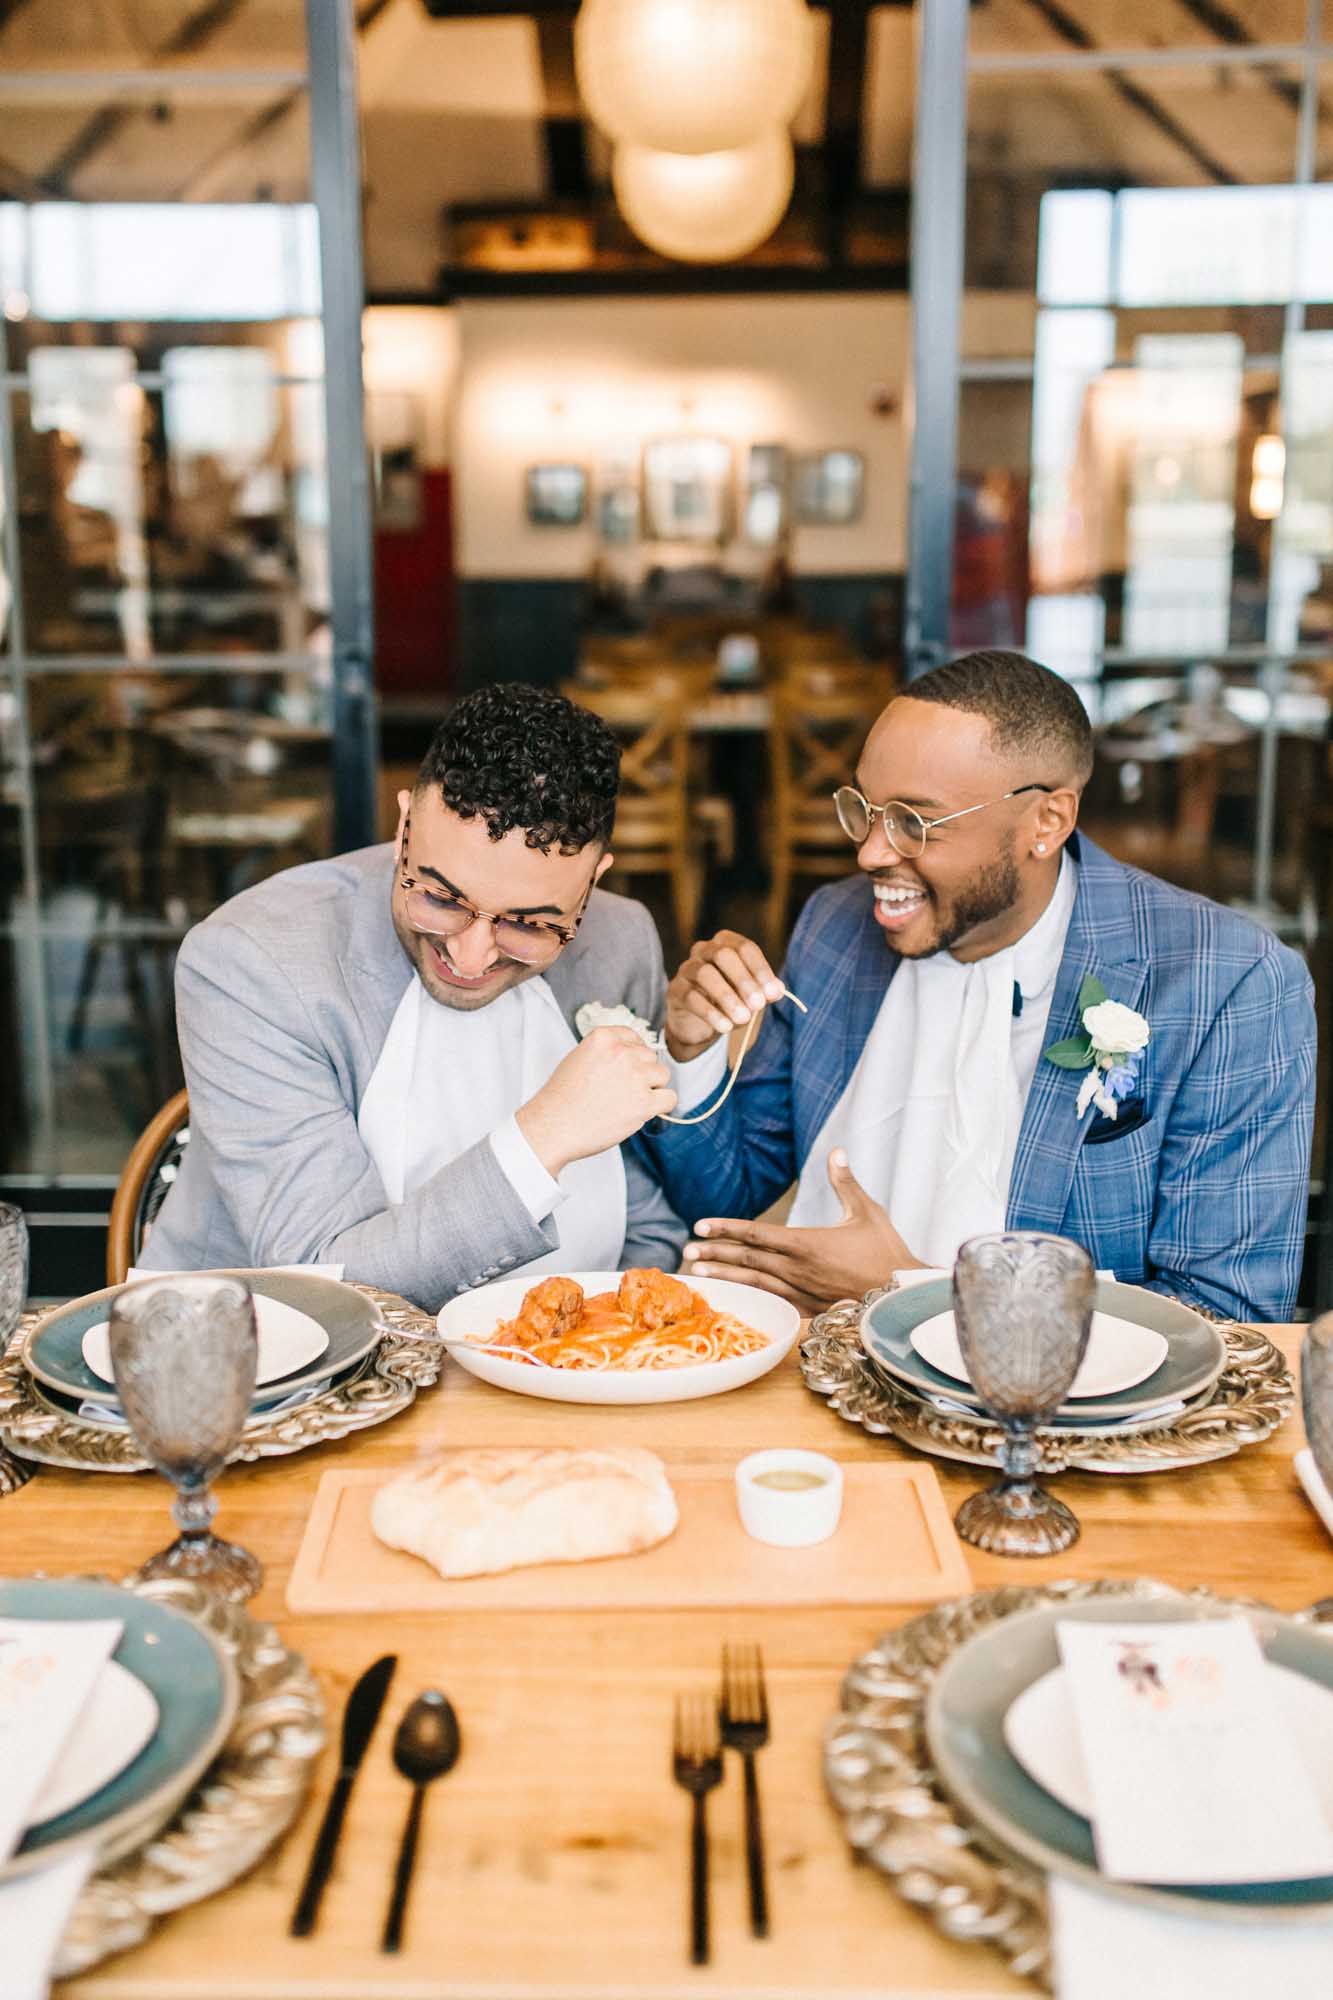 Disney World wedding ideas inspired by Lady and the Tramp | Emma Anne Photography | Featured on Equally Wed, the leading LGBTQ+ wedding magazine